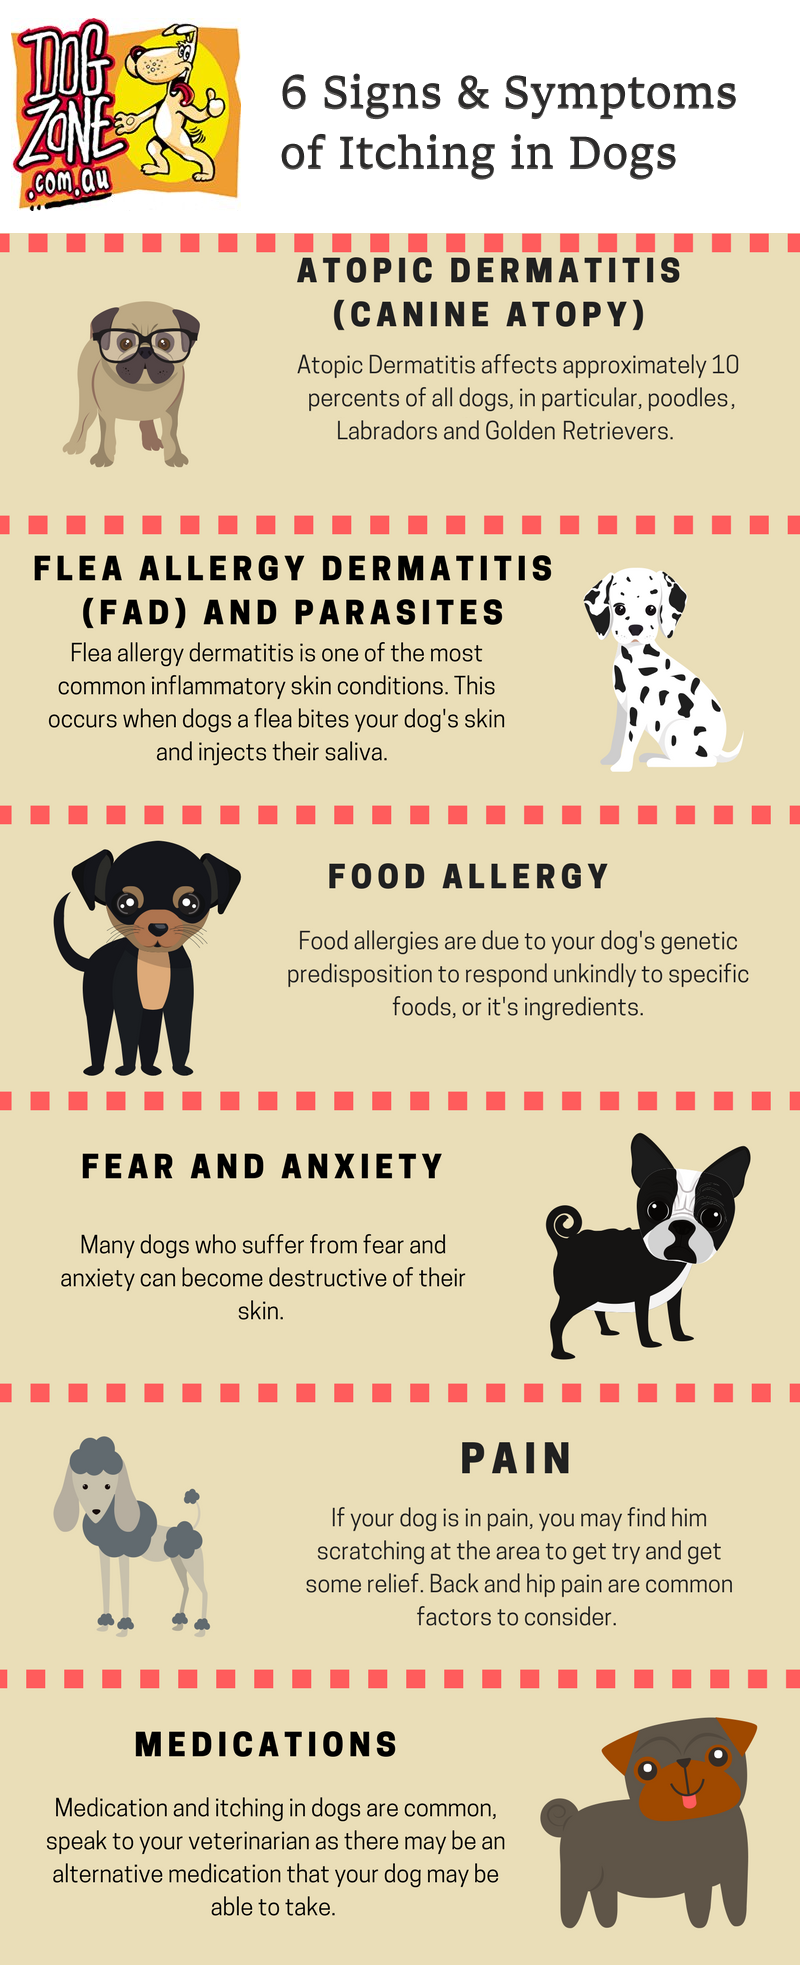 Signs & Symptoms of Itching in Dogs Infographic